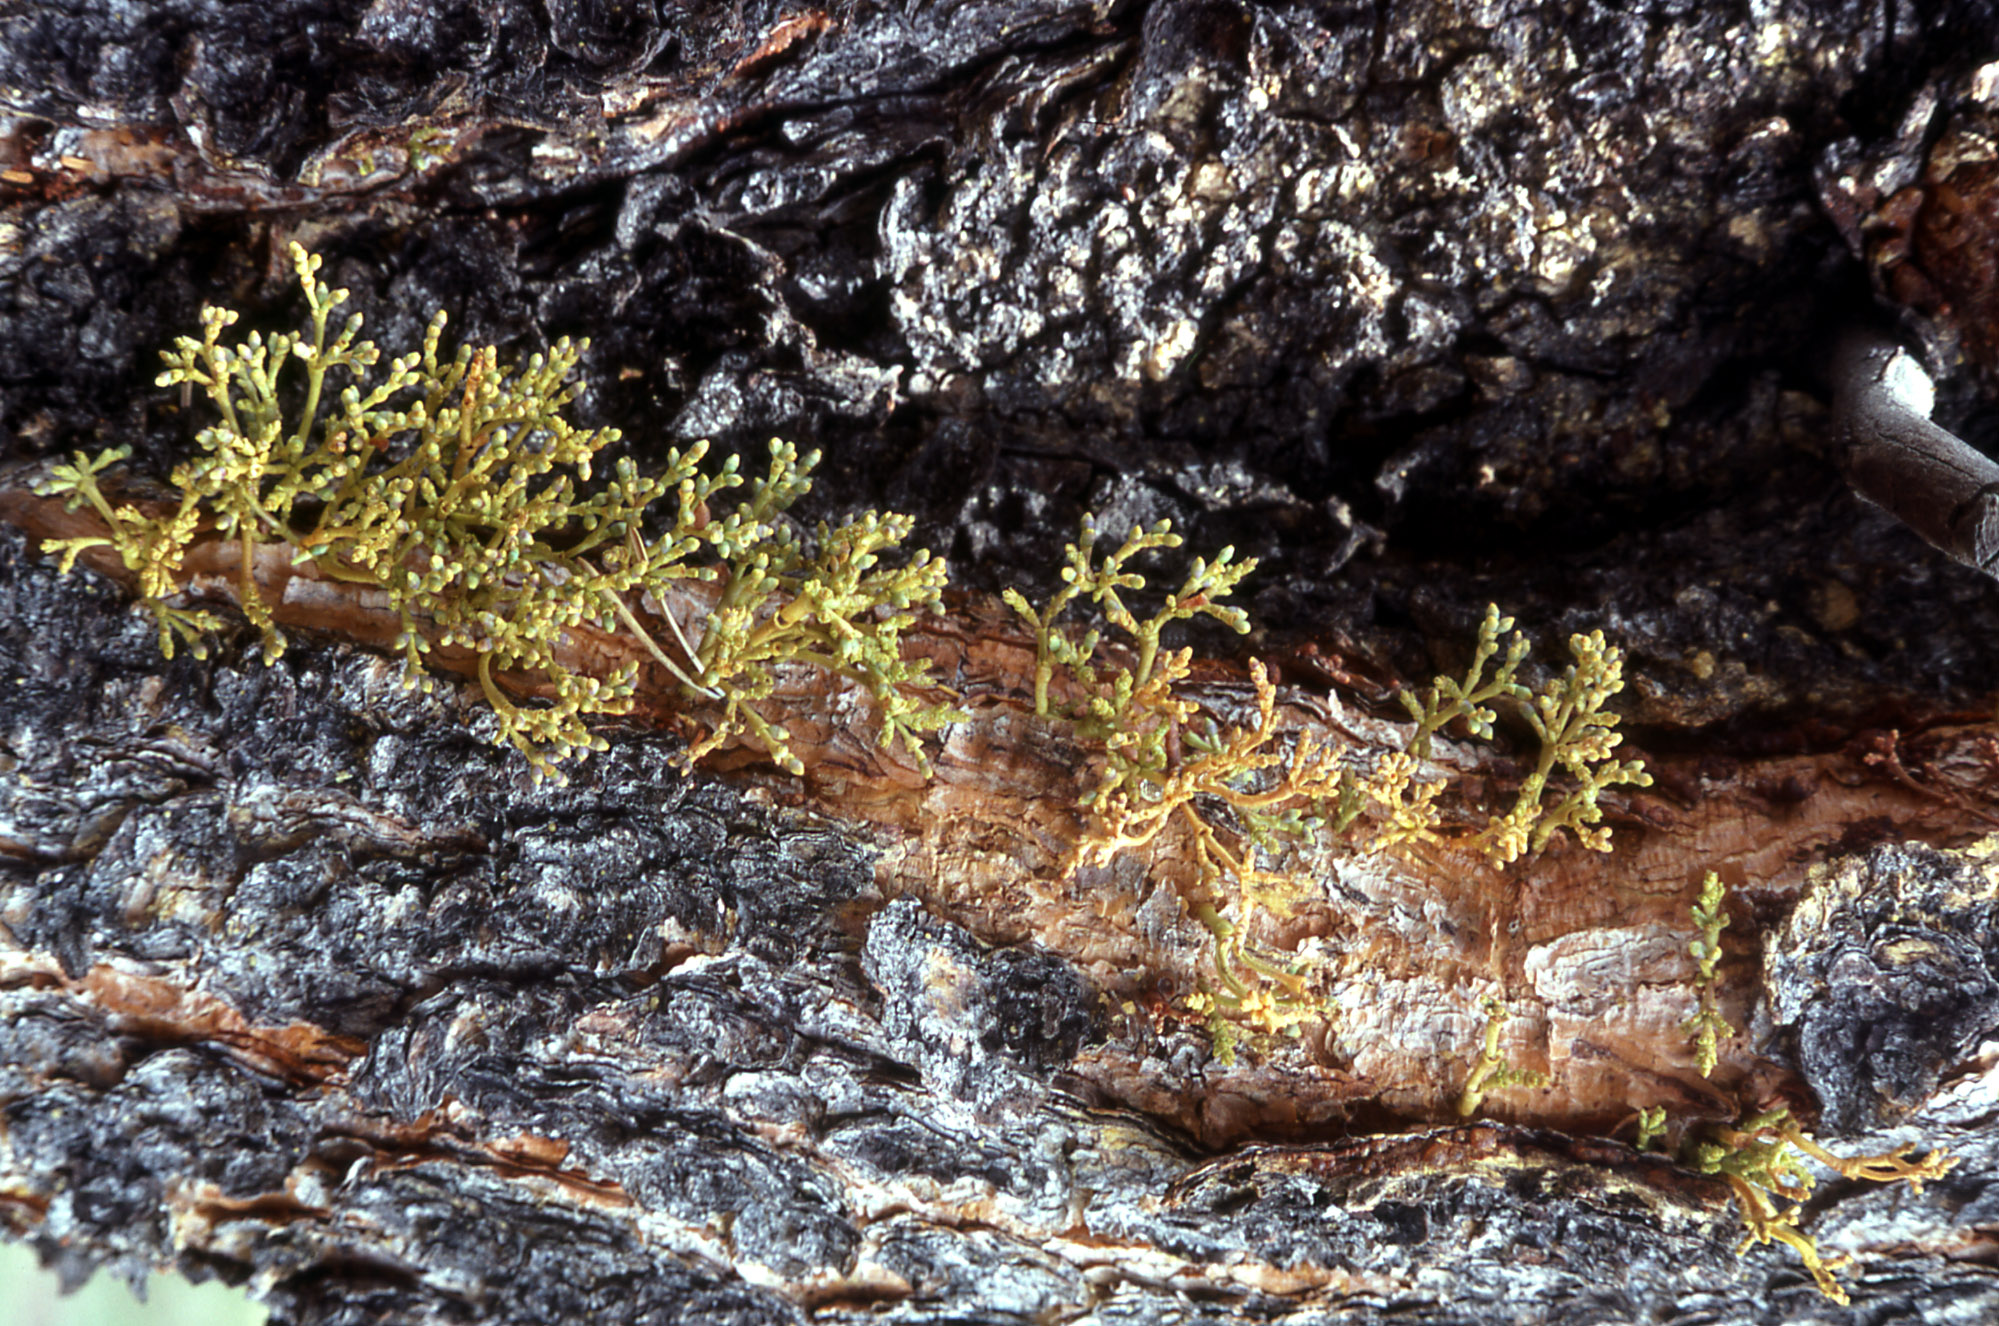 Small, green broom-shaped growth on a section of bark.